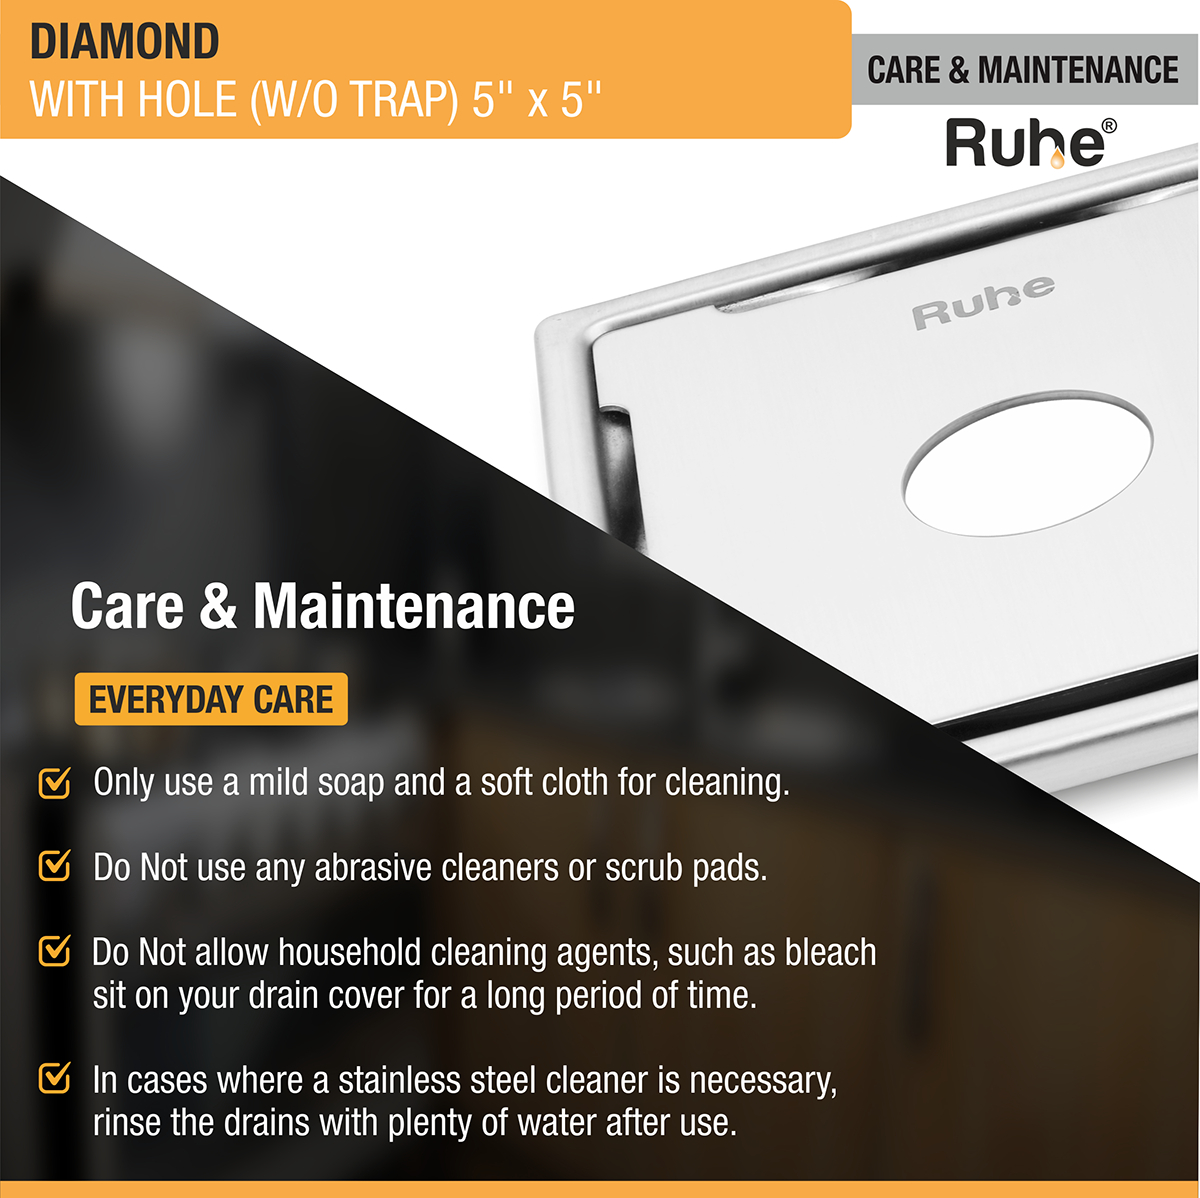 Diamond Square Floor Drain (5 x 5 Inches) with Hole (304 Grade) care and maintenance